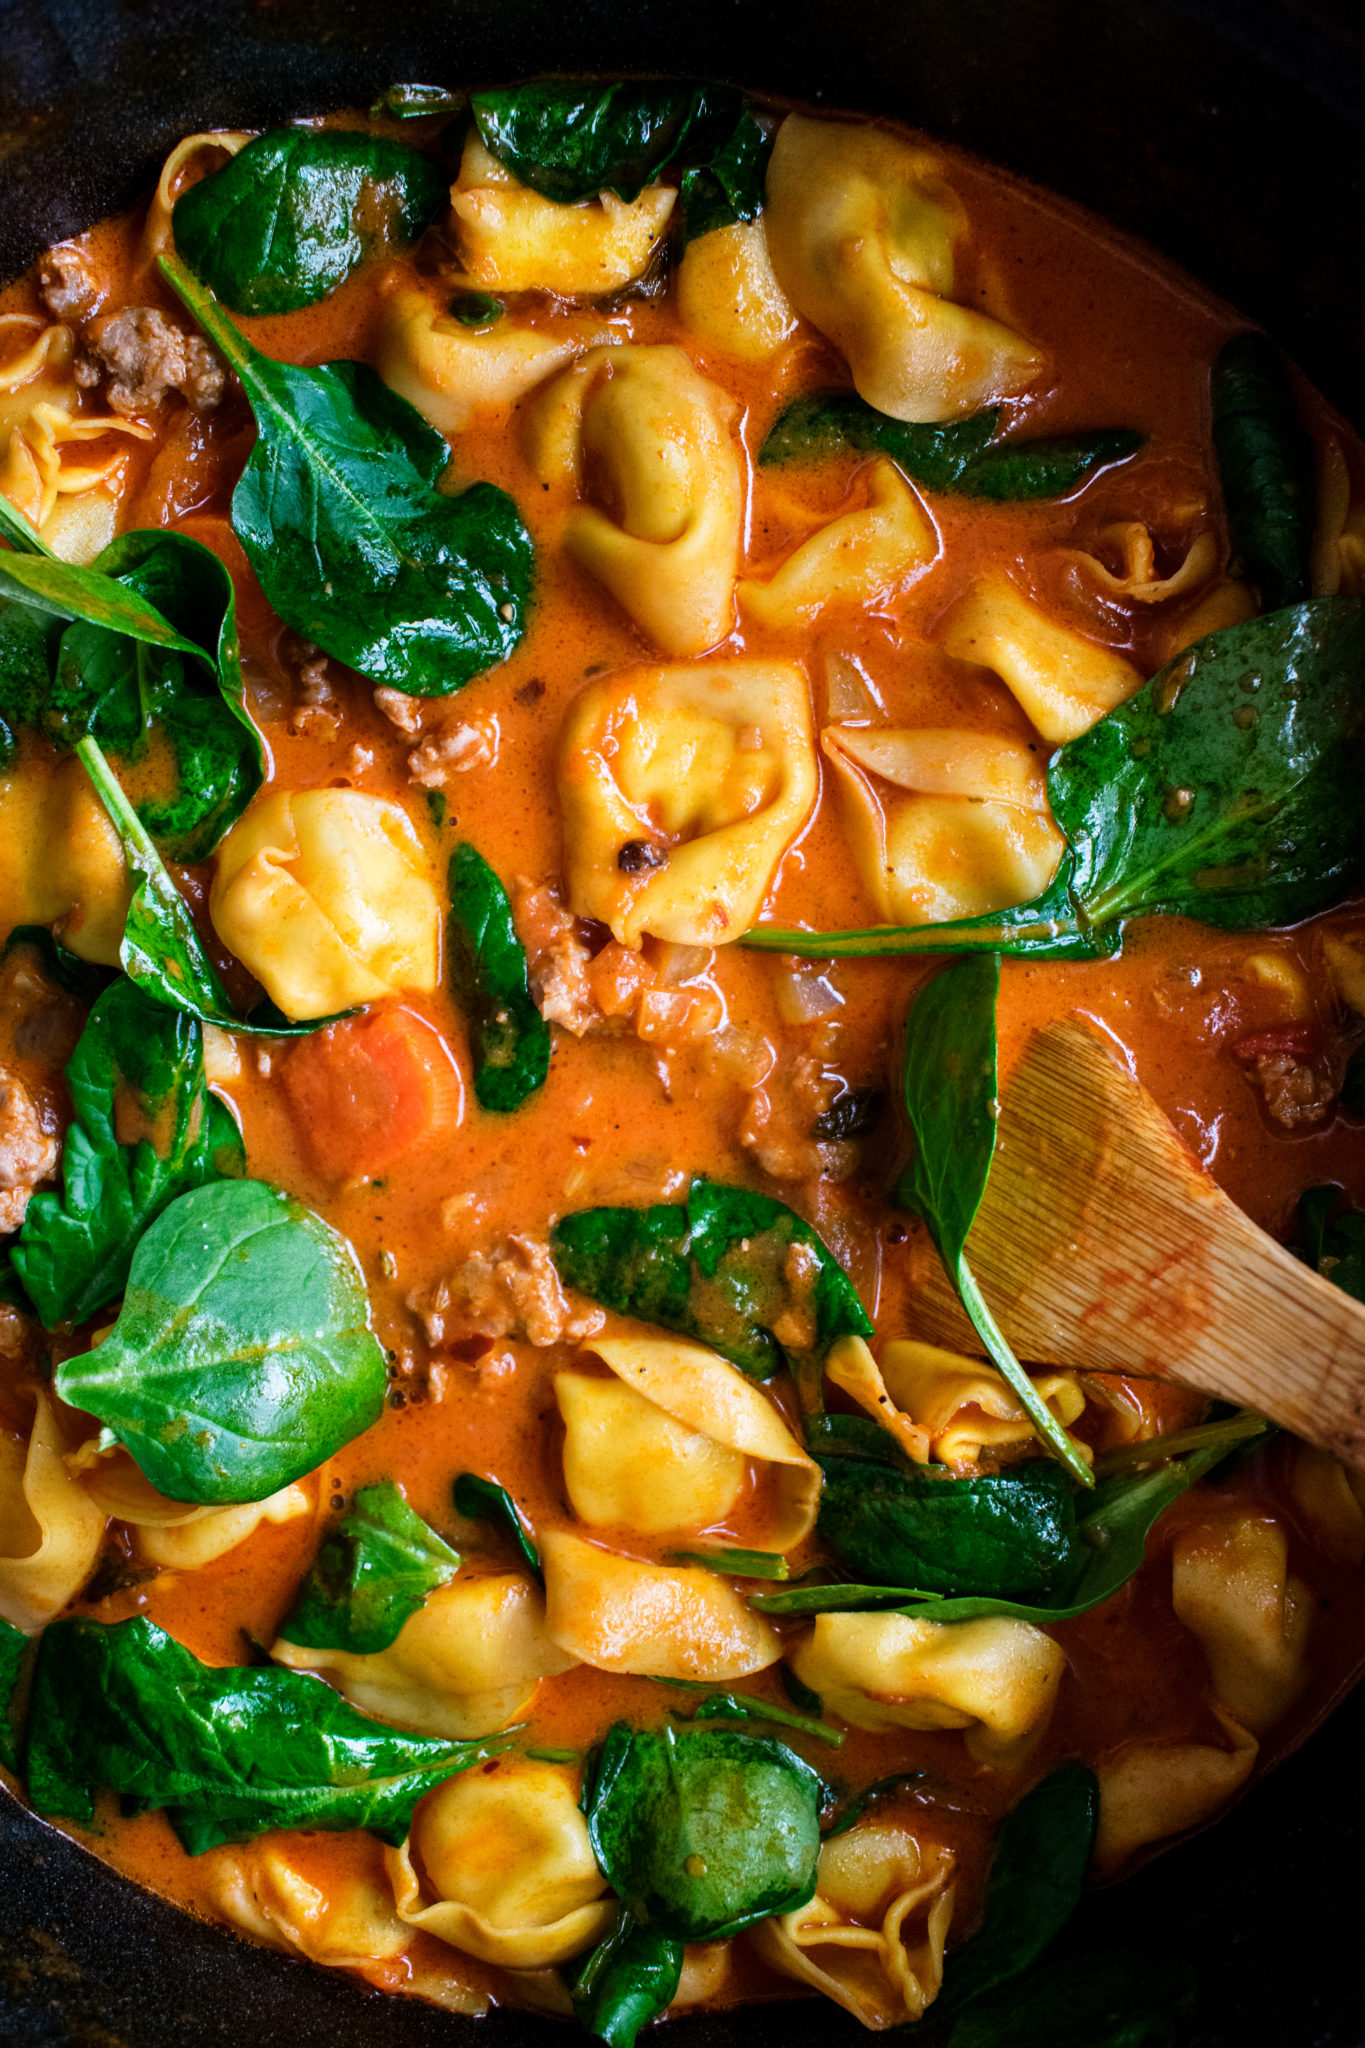 Creamy Tortellini Soup with Sausage & Spinach - The Original Dish